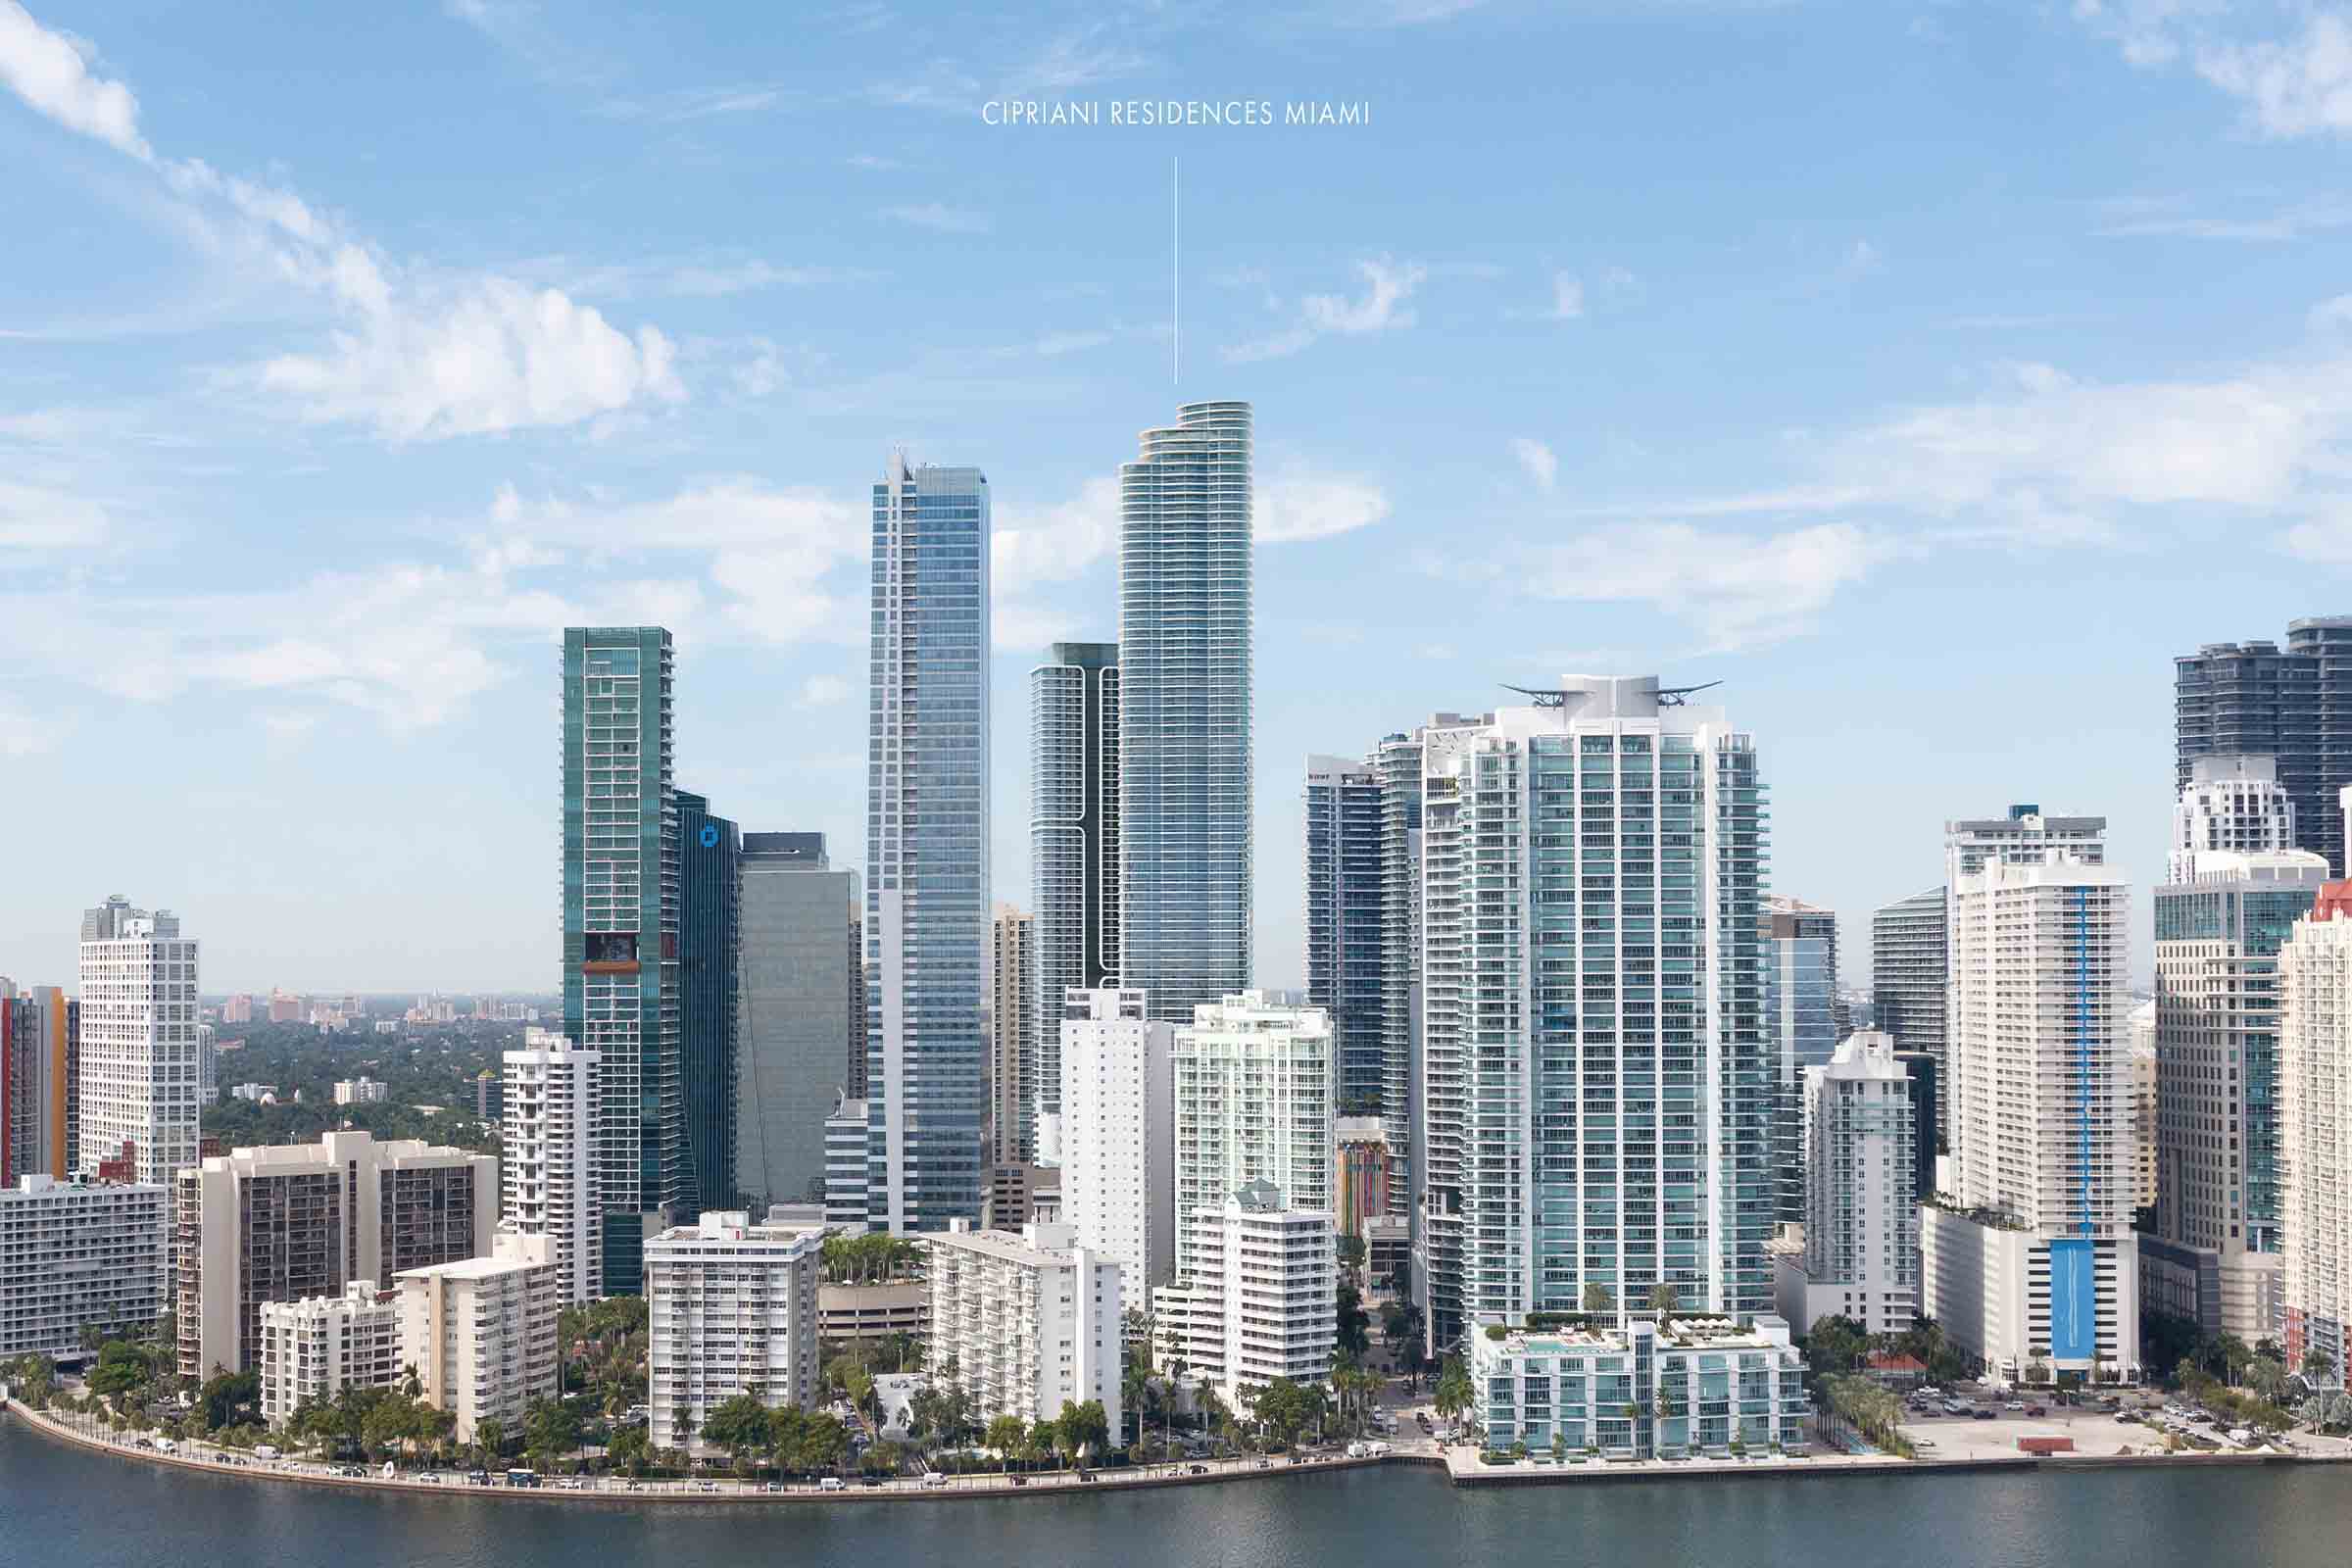 Rendering of Cipriani Residences Brickell Miami Building Location